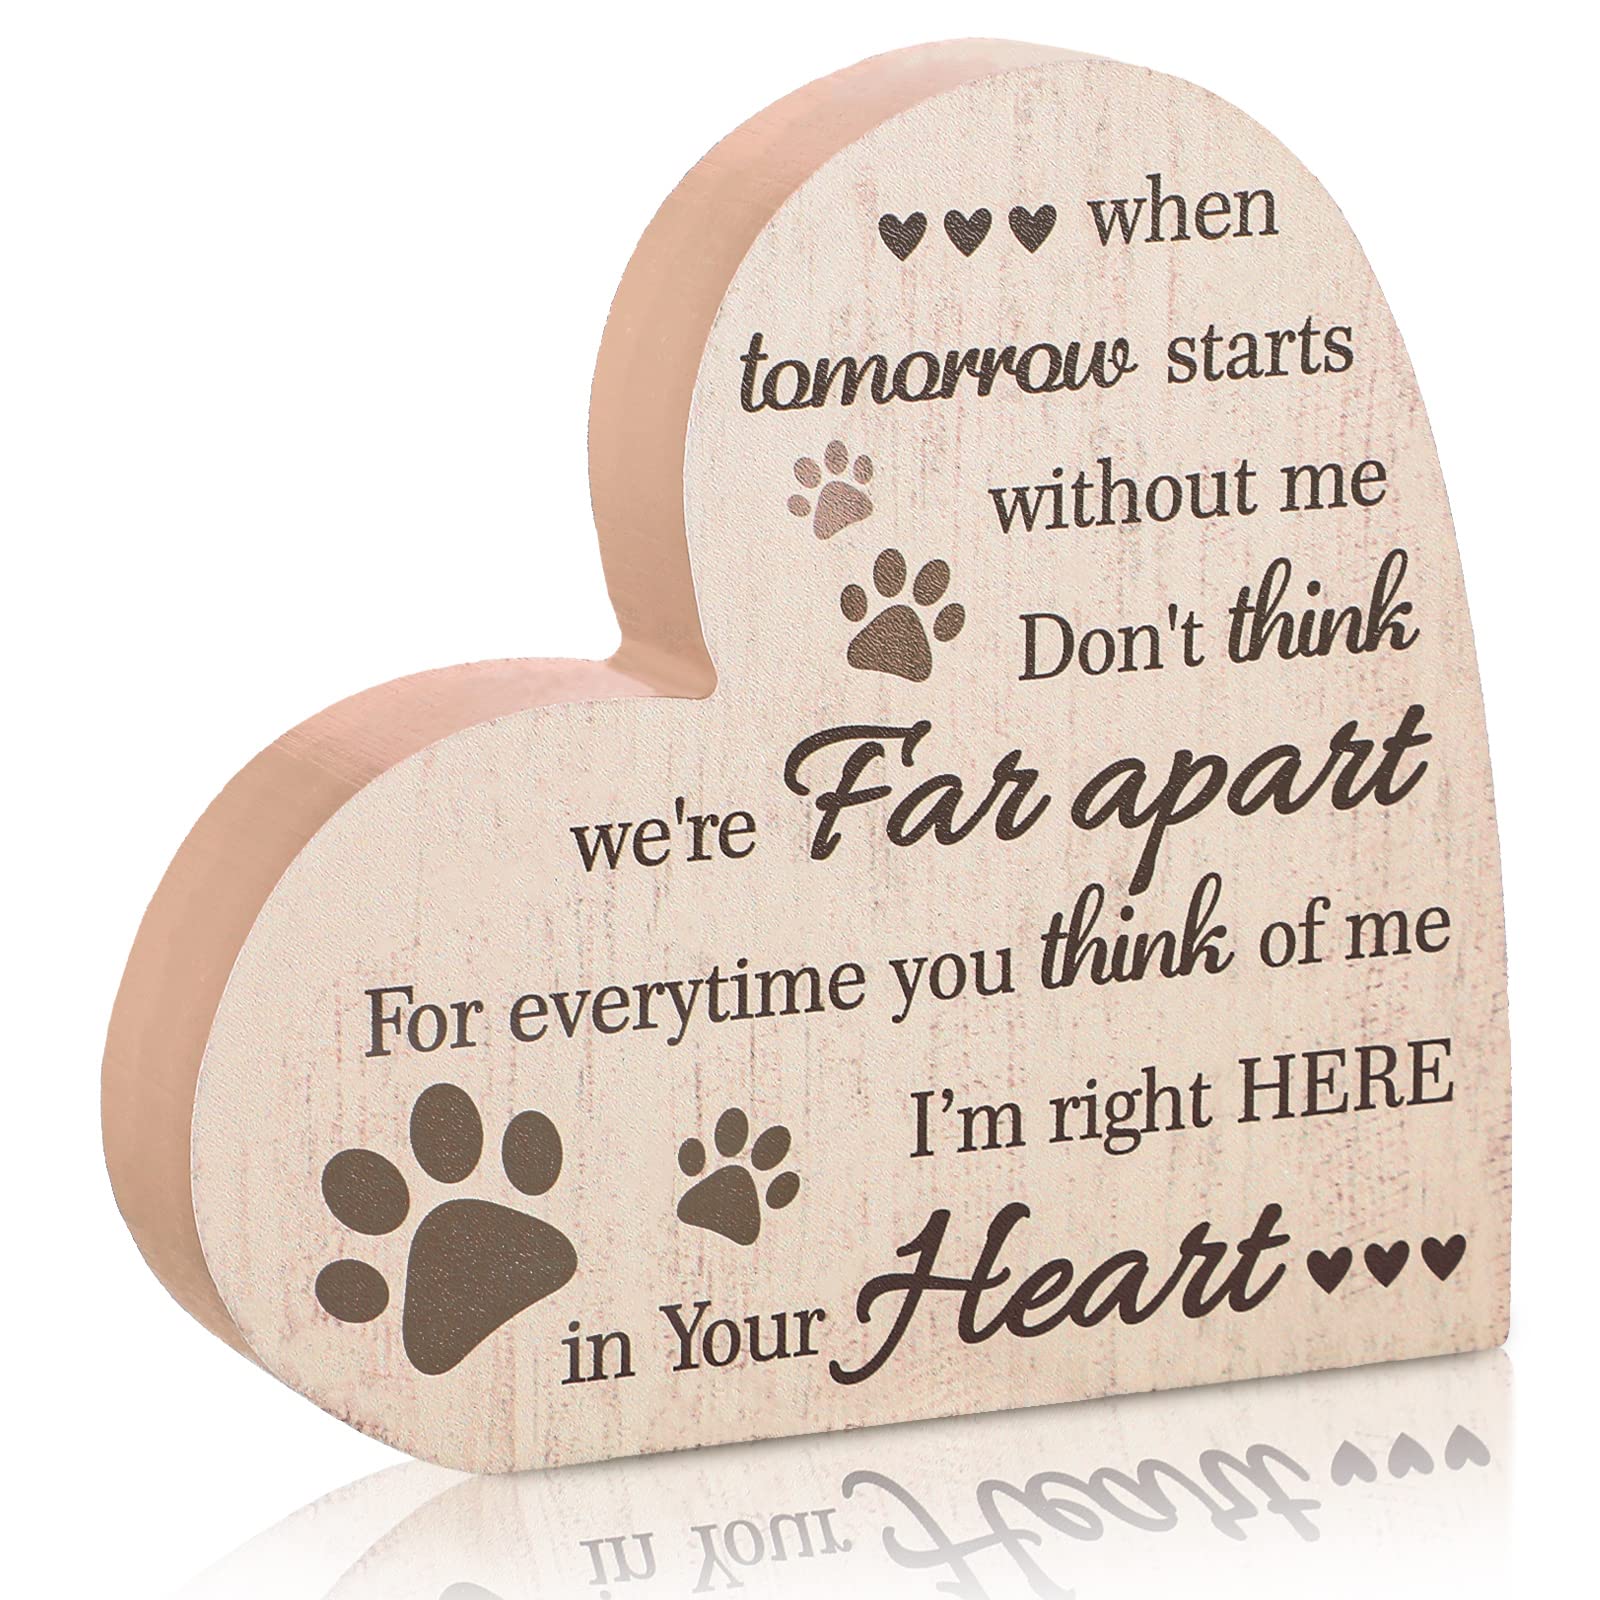 Maitys Pet Memorial Gifts Bereavement Remembrance Gifts for Loss of Dog Cat  Sympathy Condolence Gifts Heart Shaped Wood Sign When Tomorrow Starts  Without Me Wooden Plague for Table Desk Decor